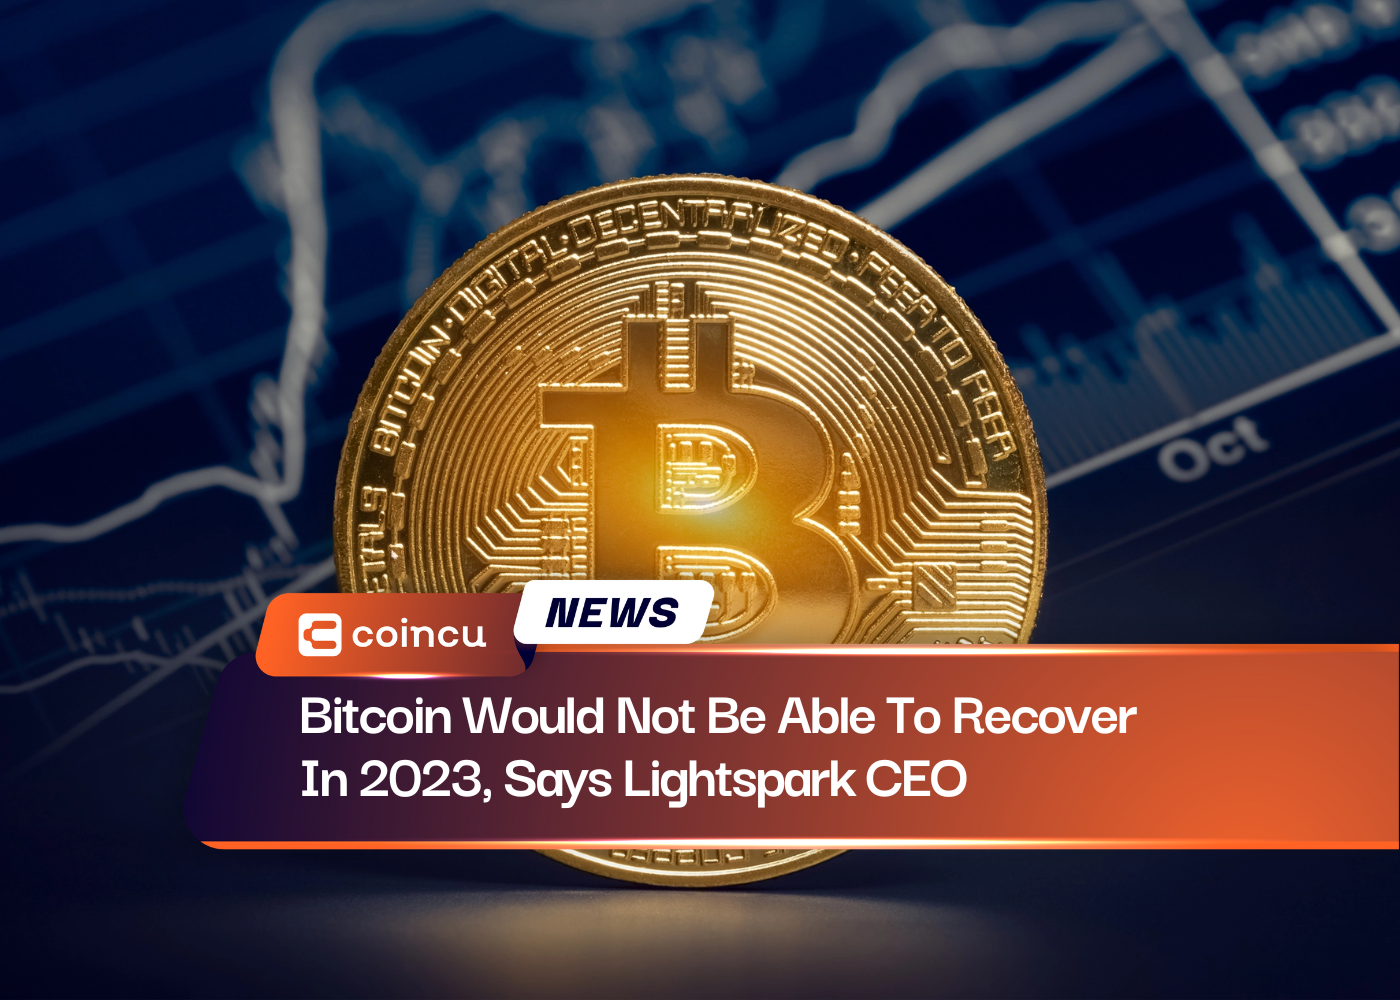 Bitcoin Would Not Be Able To Recover In 2023, Says Lightspark CEO